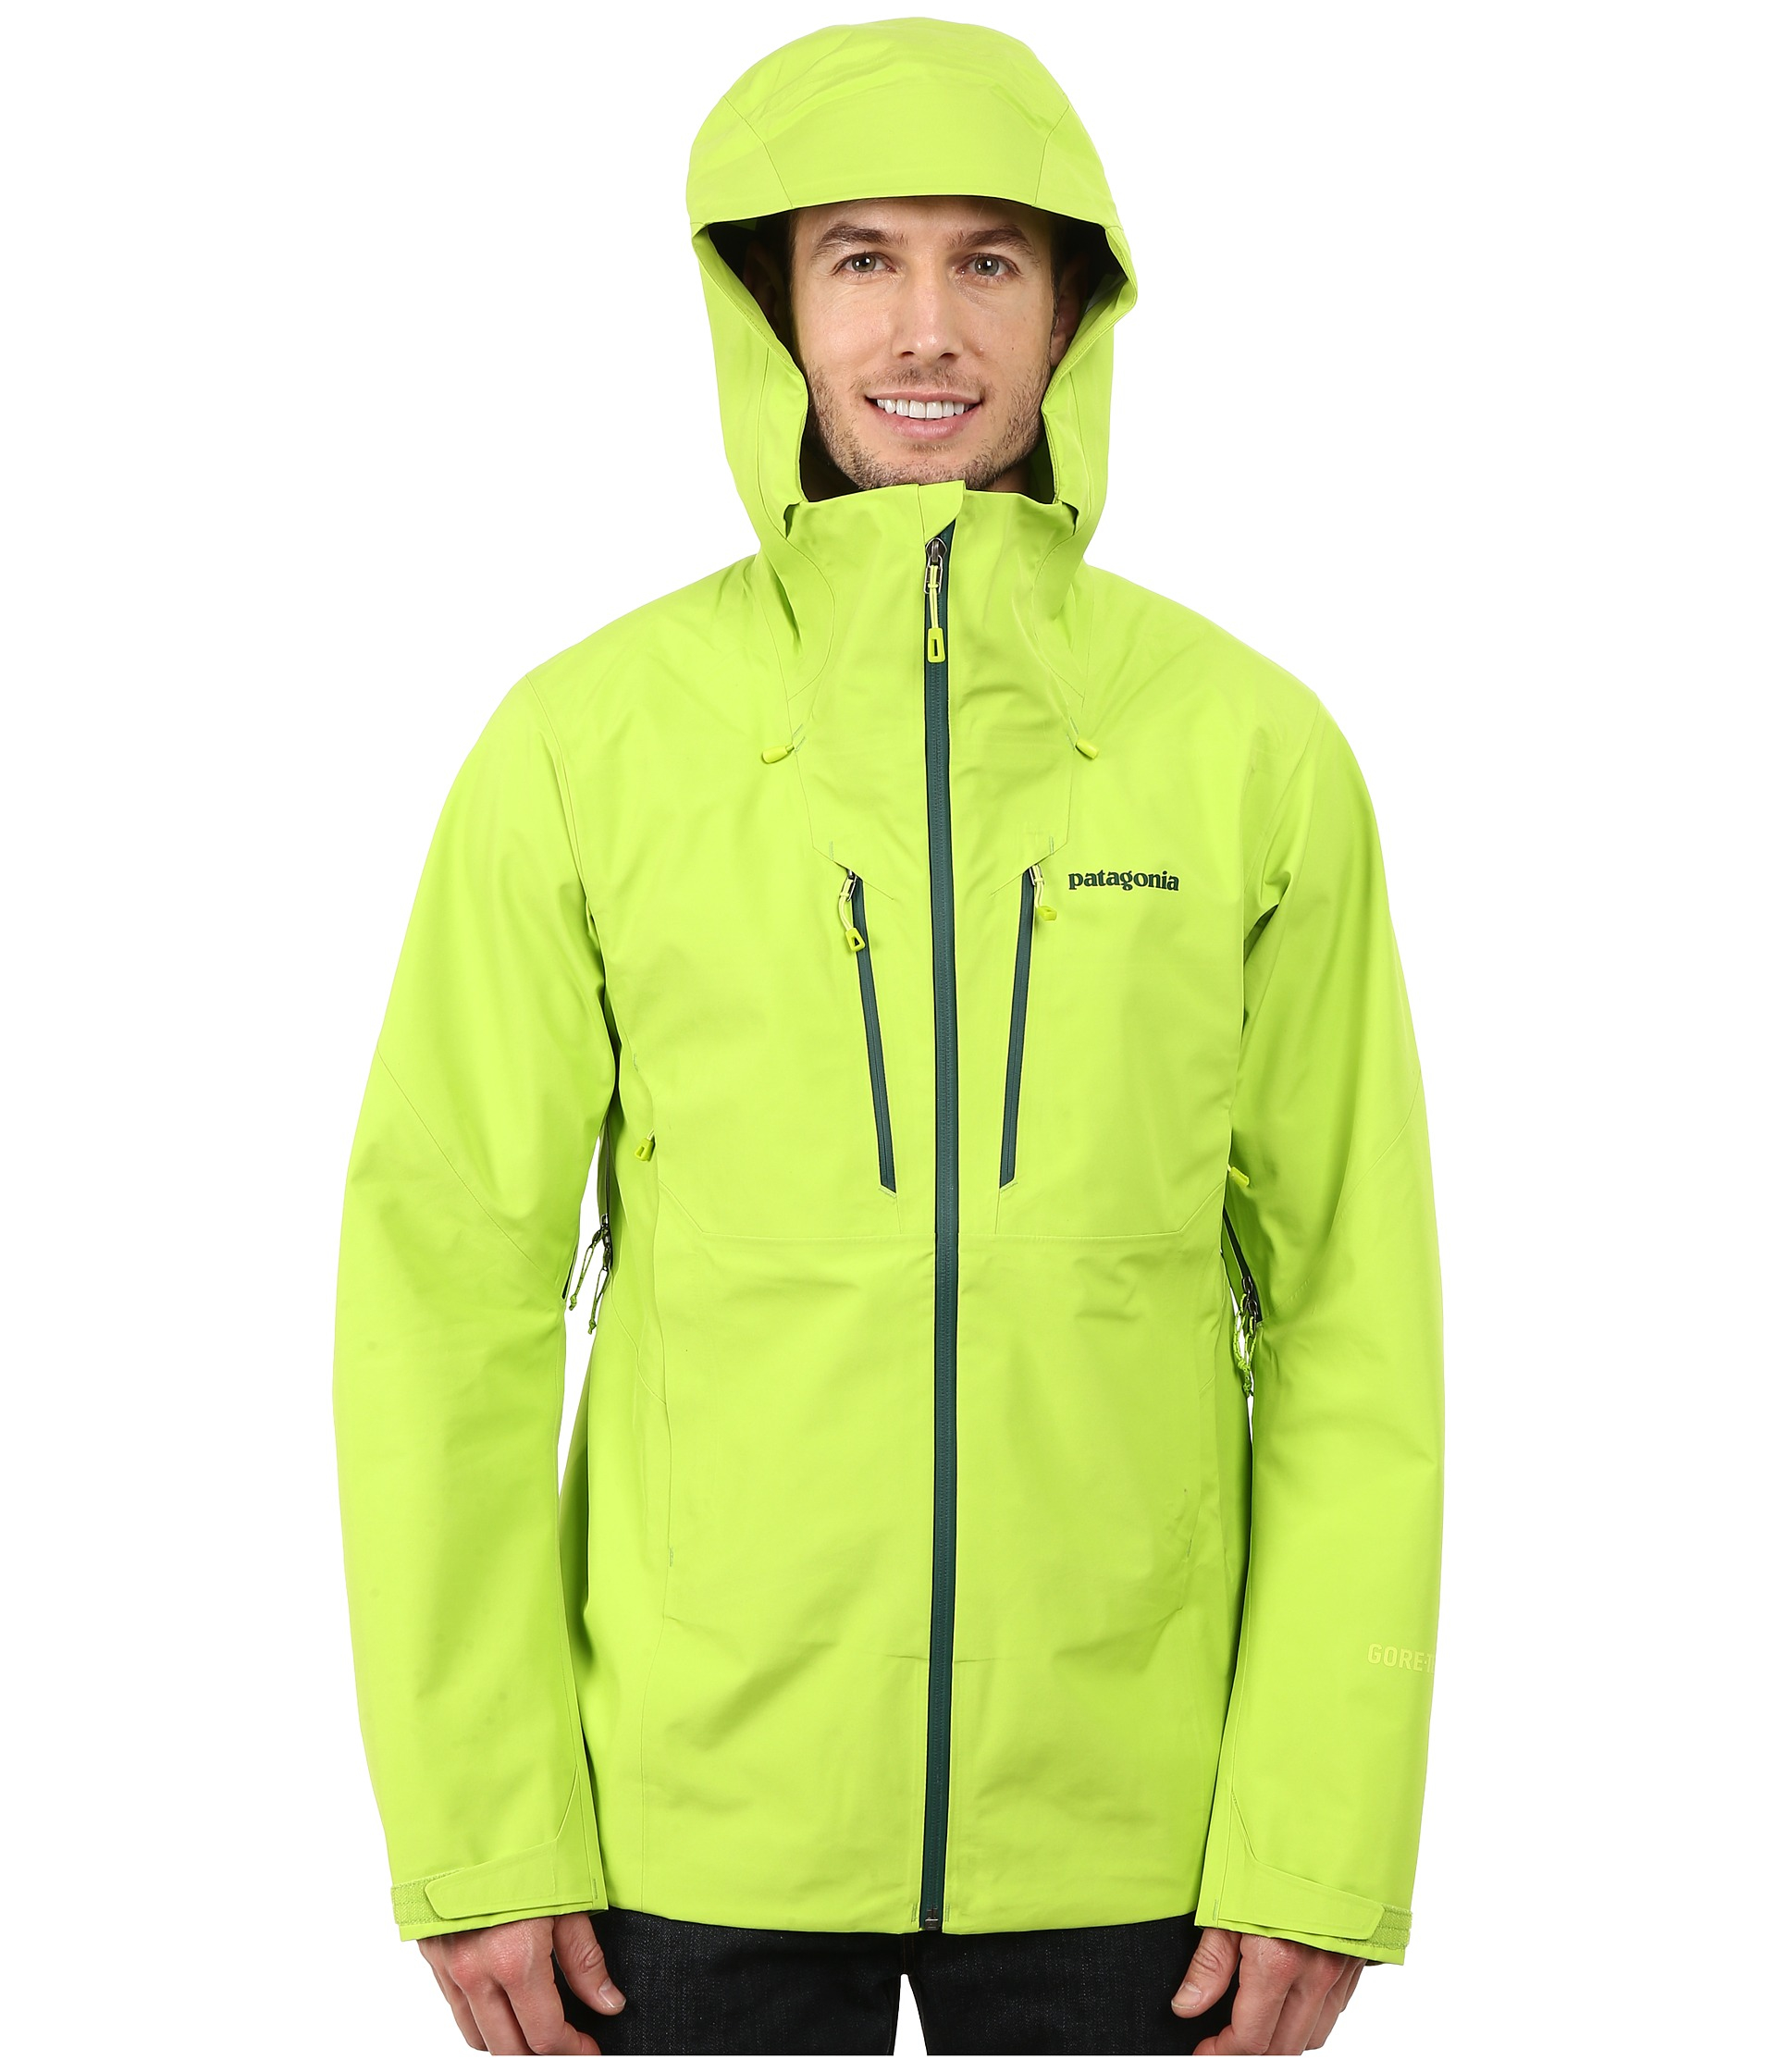 Patagonia Synthetic Triolet Jacket in Green for Men - Lyst